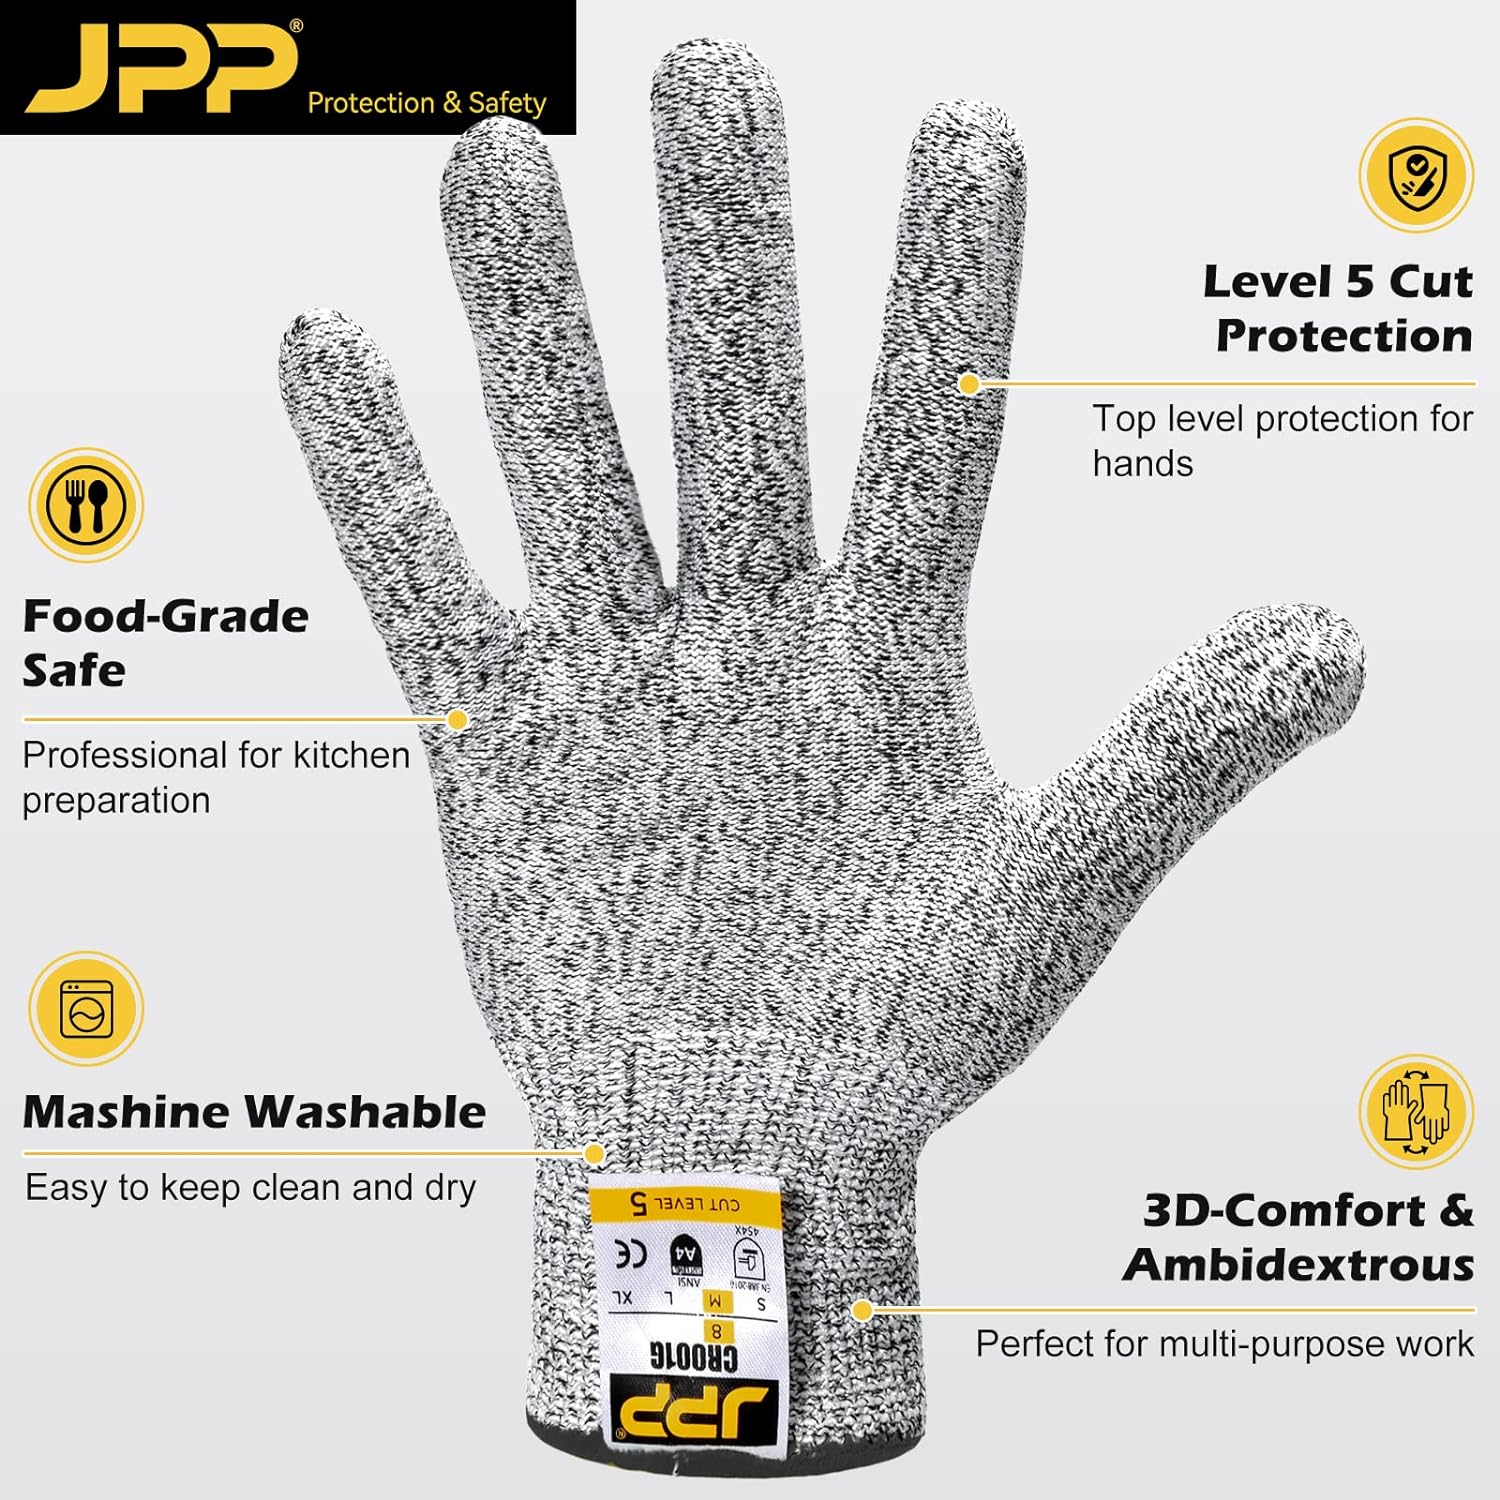 JPP Premium Cut Resistant Gloves, Cutting Proof CE Level 5 Protection